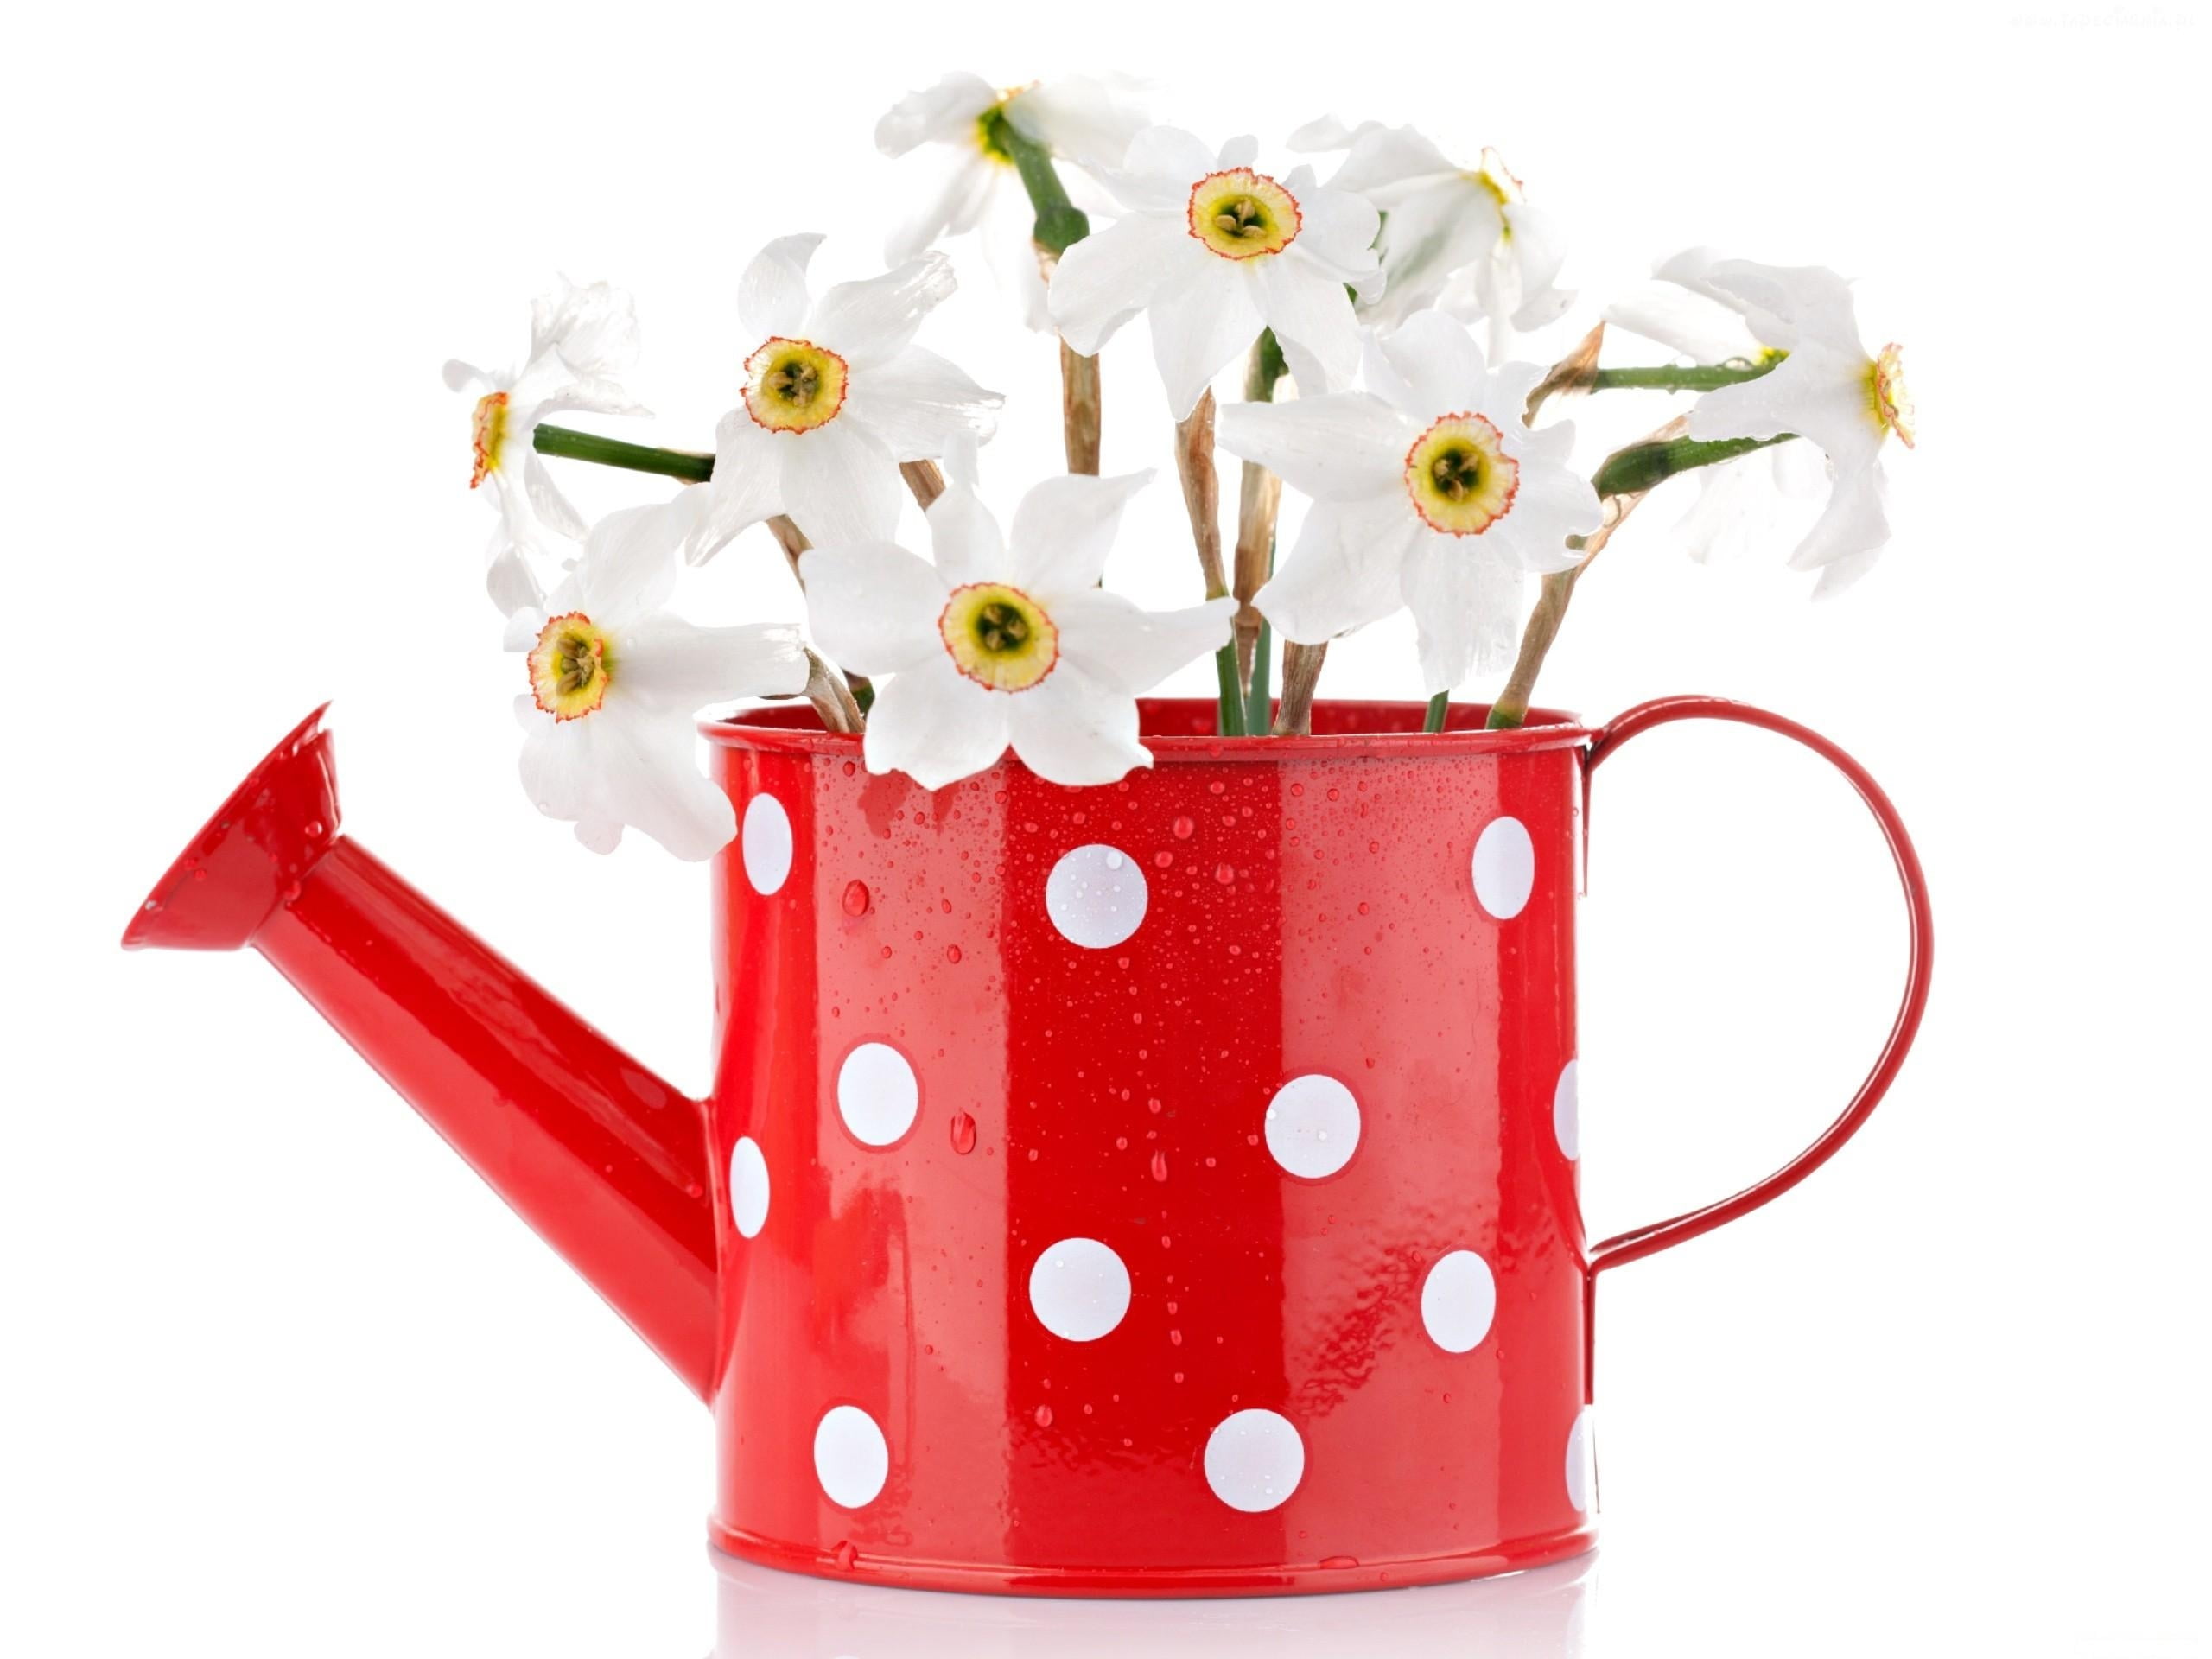 white-and-yellow Daffodils in red watering can